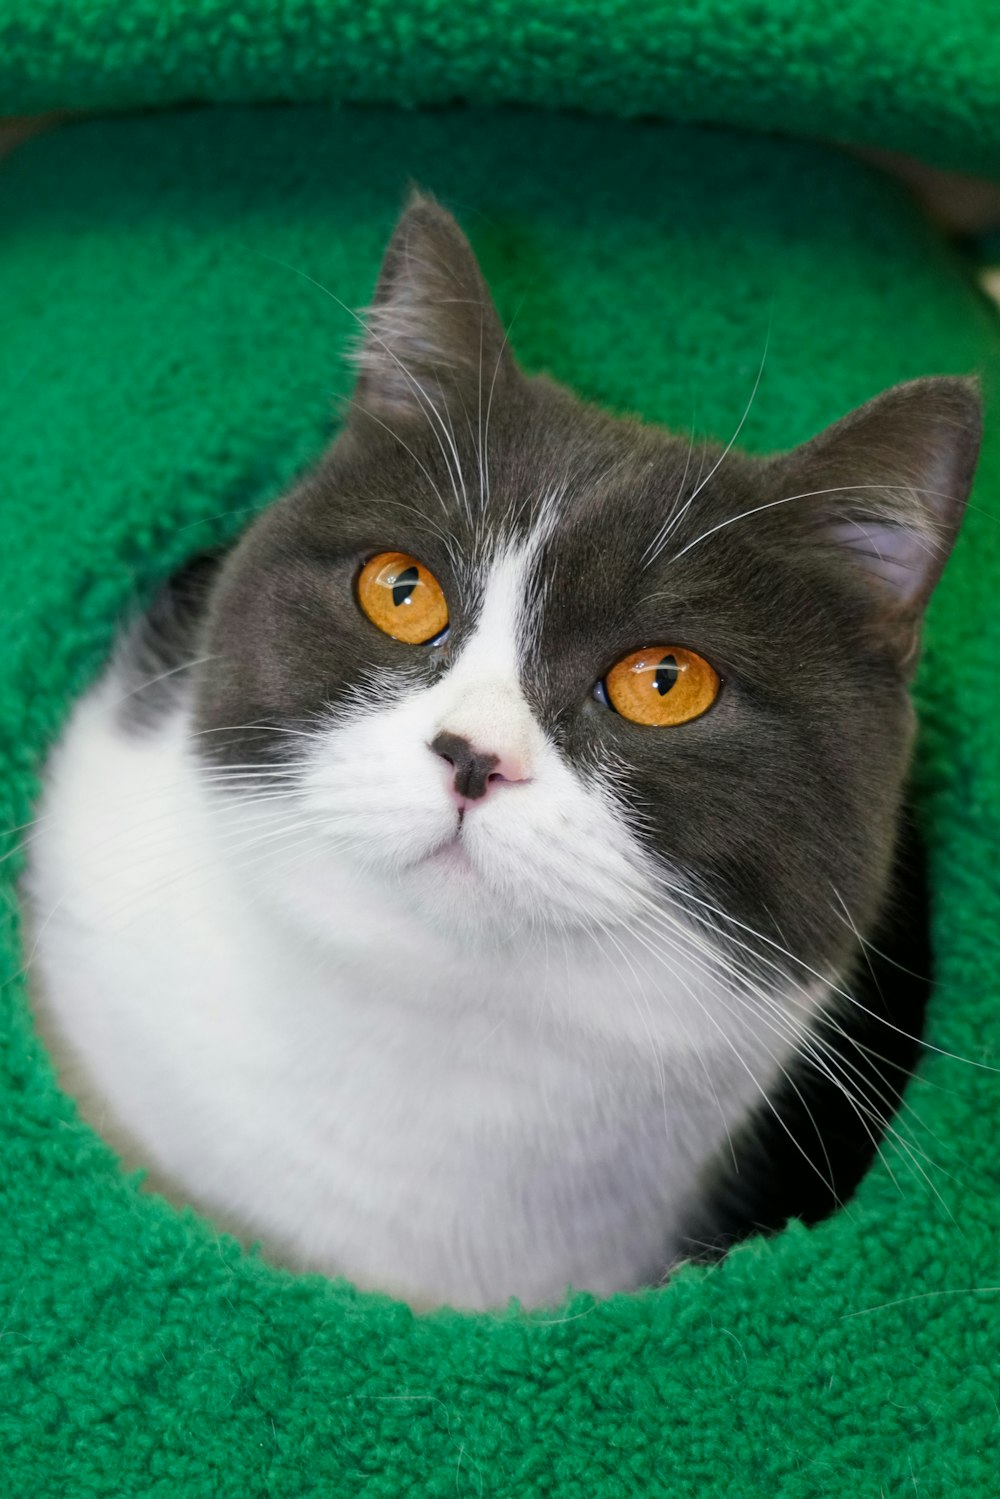 a gray and white cat sitting in a green cat bed